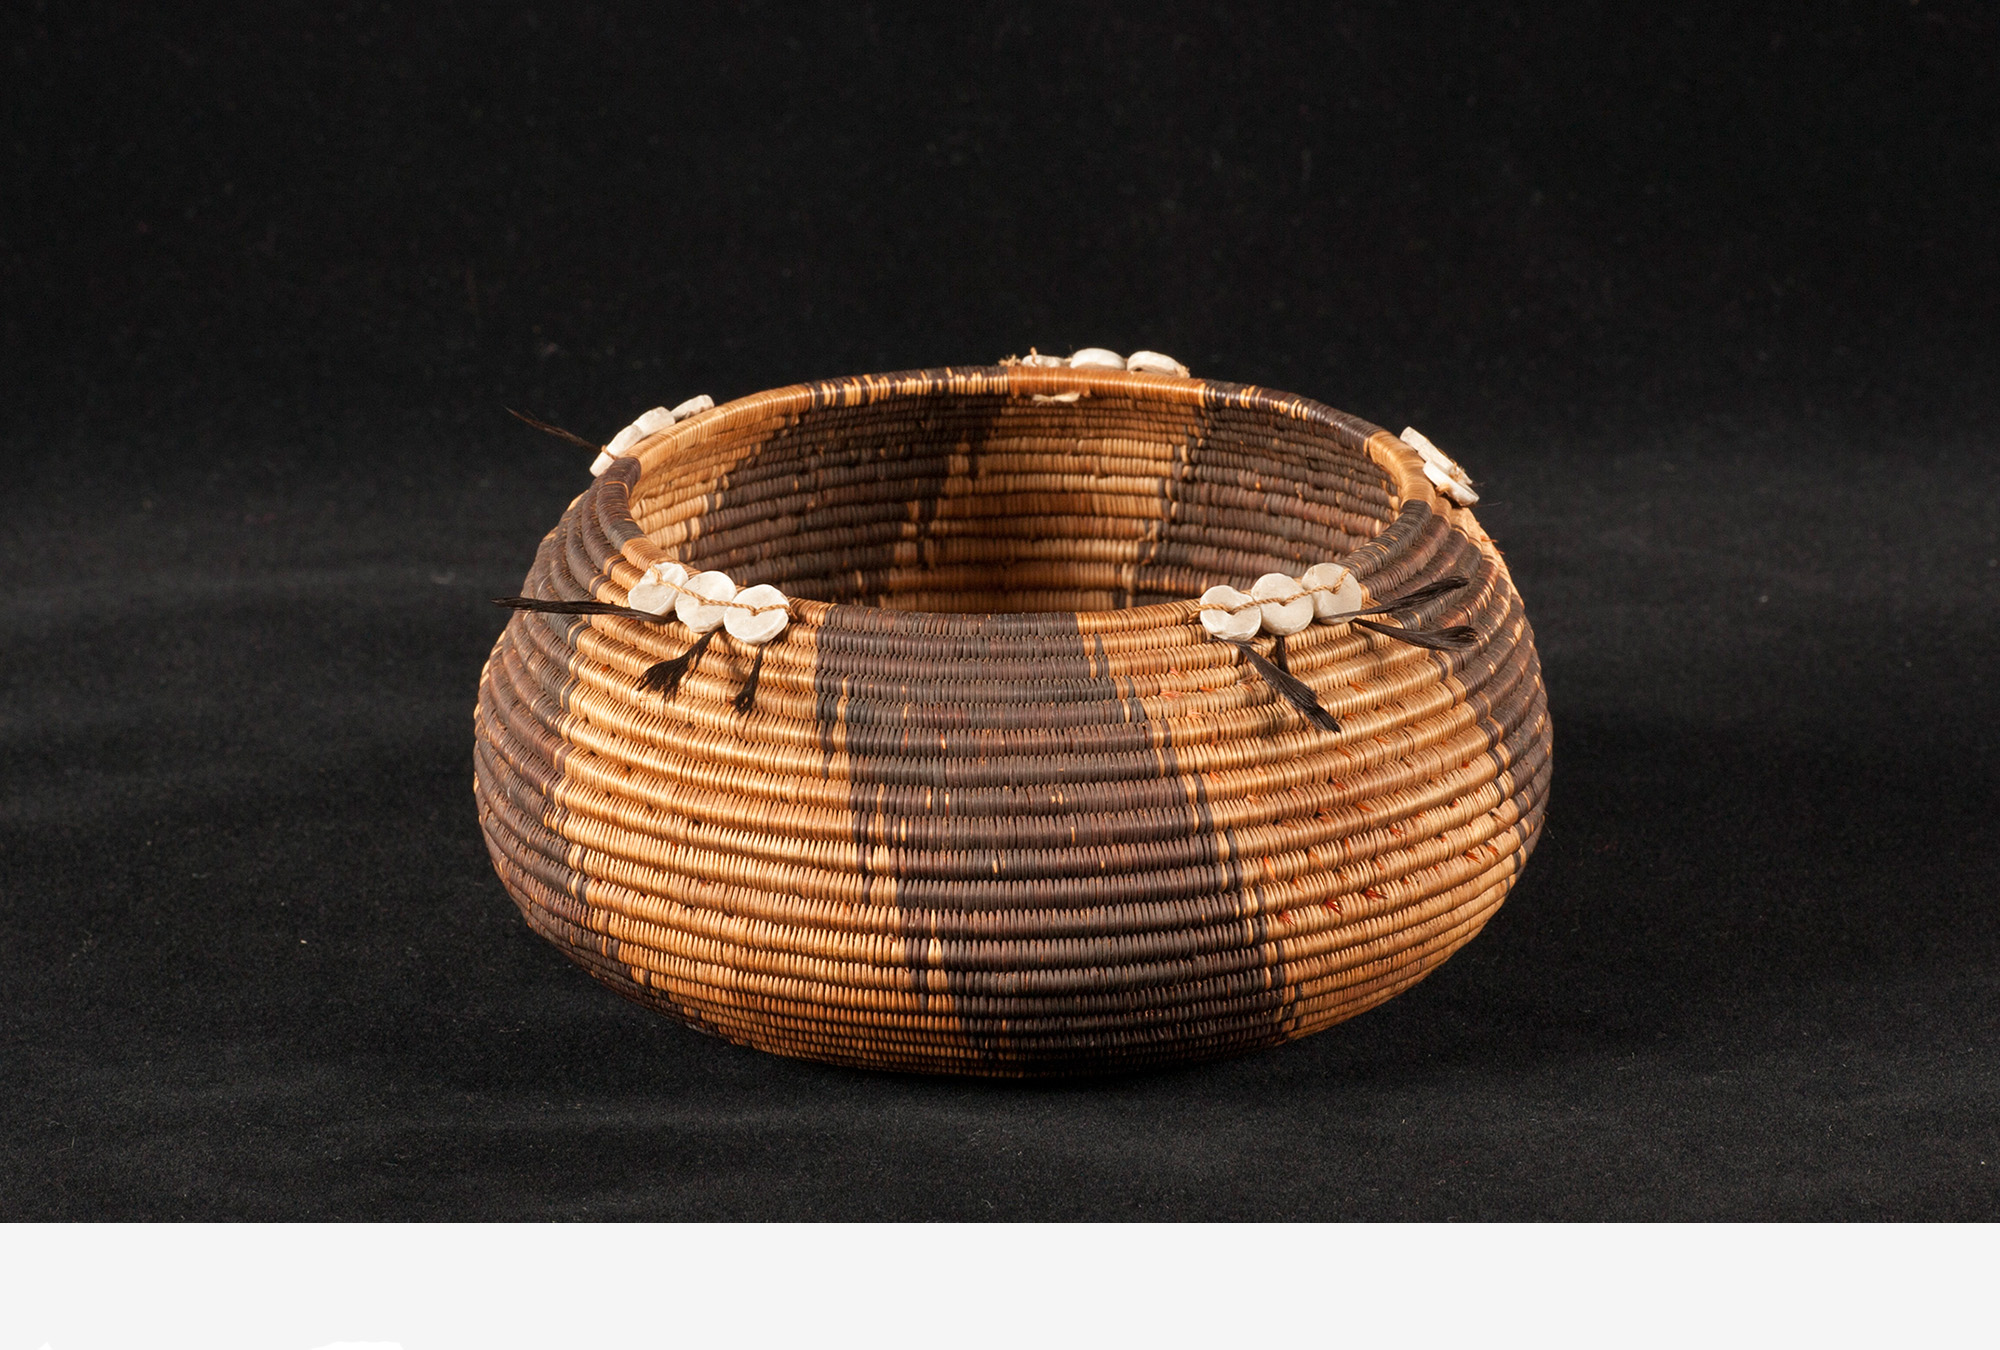 Gift or ceremonial basket from the Pomo region of Northern California.